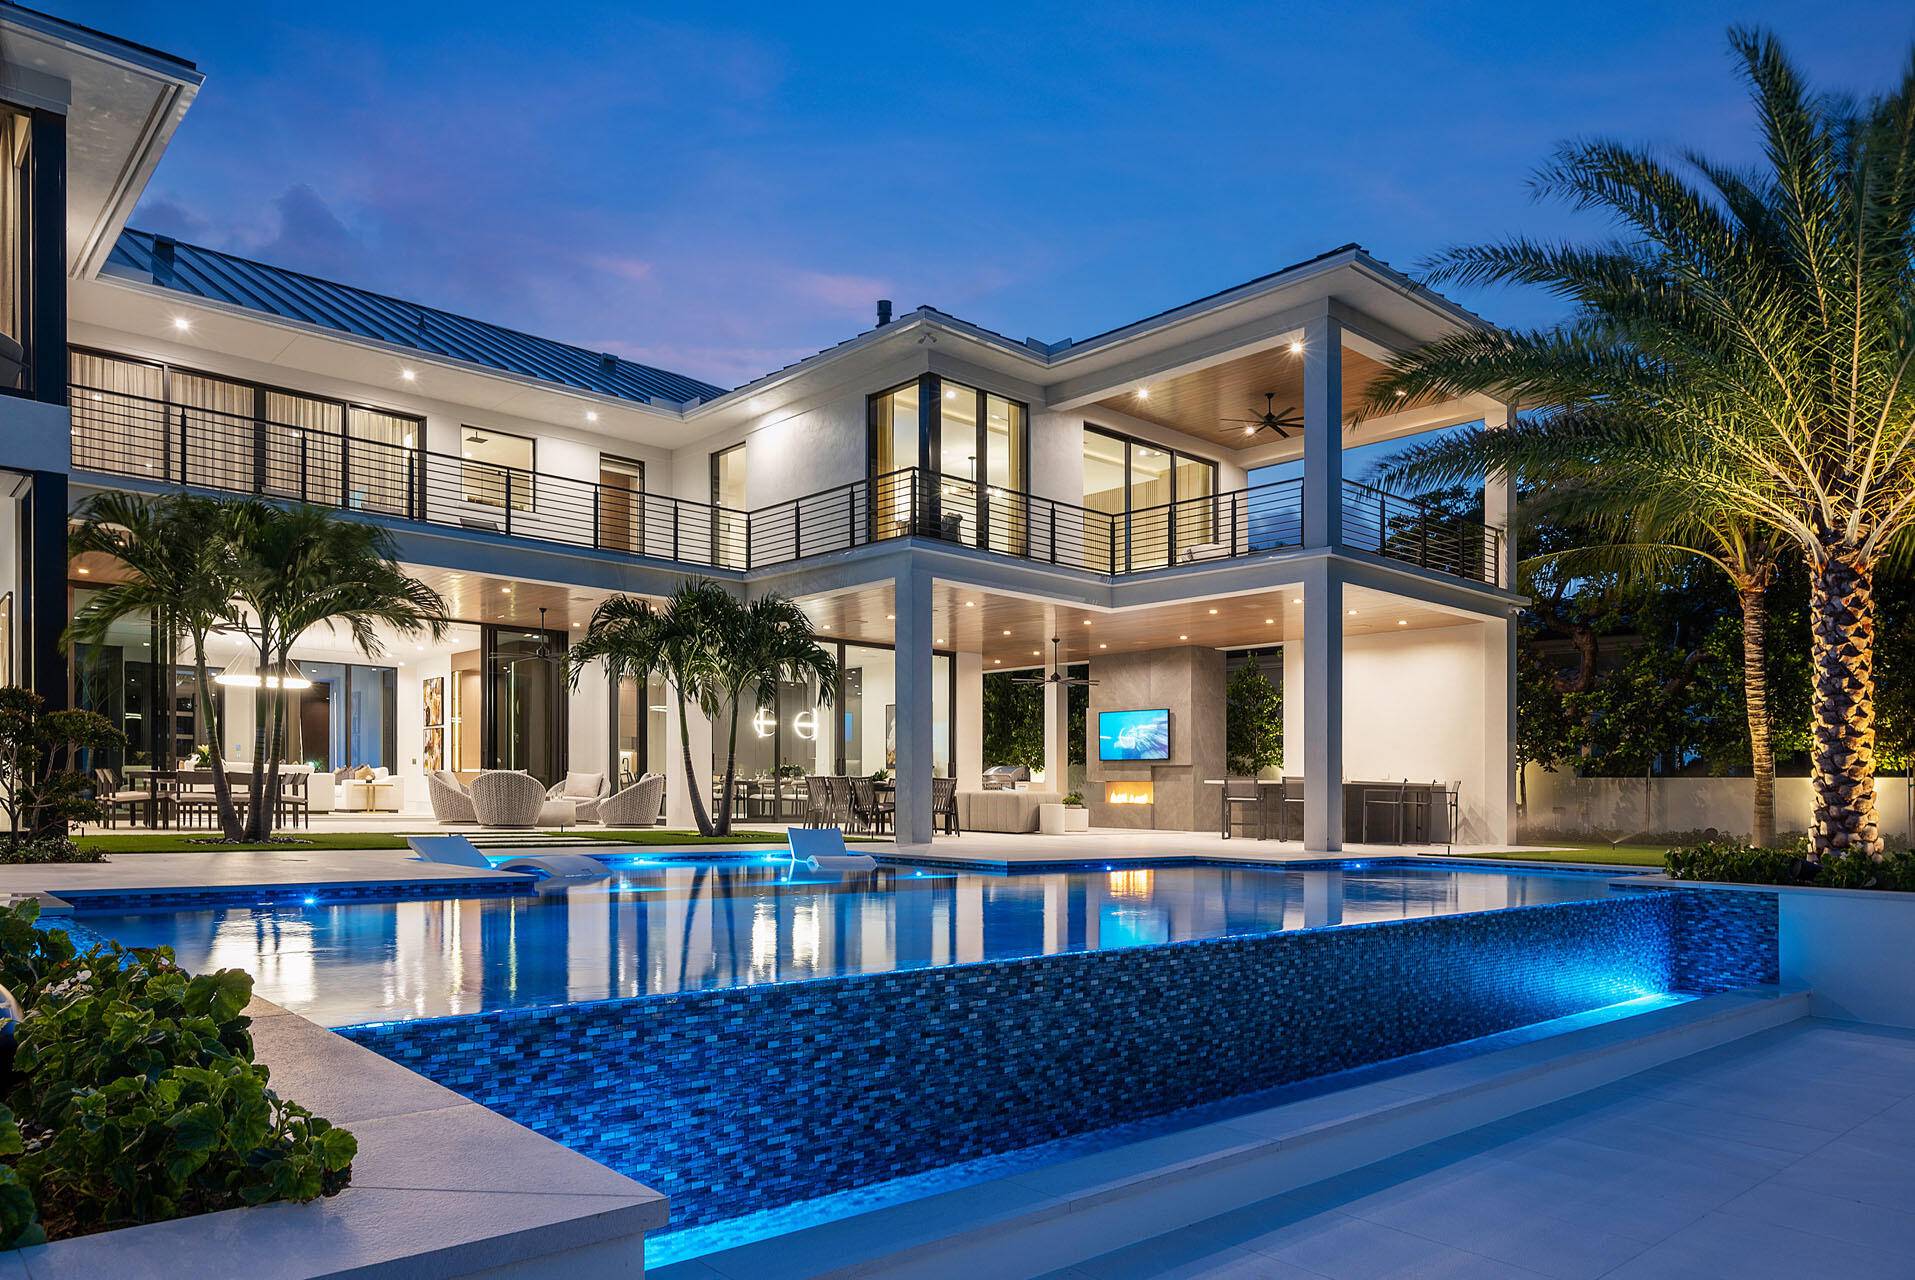 Situated in Boca Raton's most prestigious community, this brand new waterfront SRD Signature Estate offers the height of luxury and elegance combined with the latest high tech upgrades.